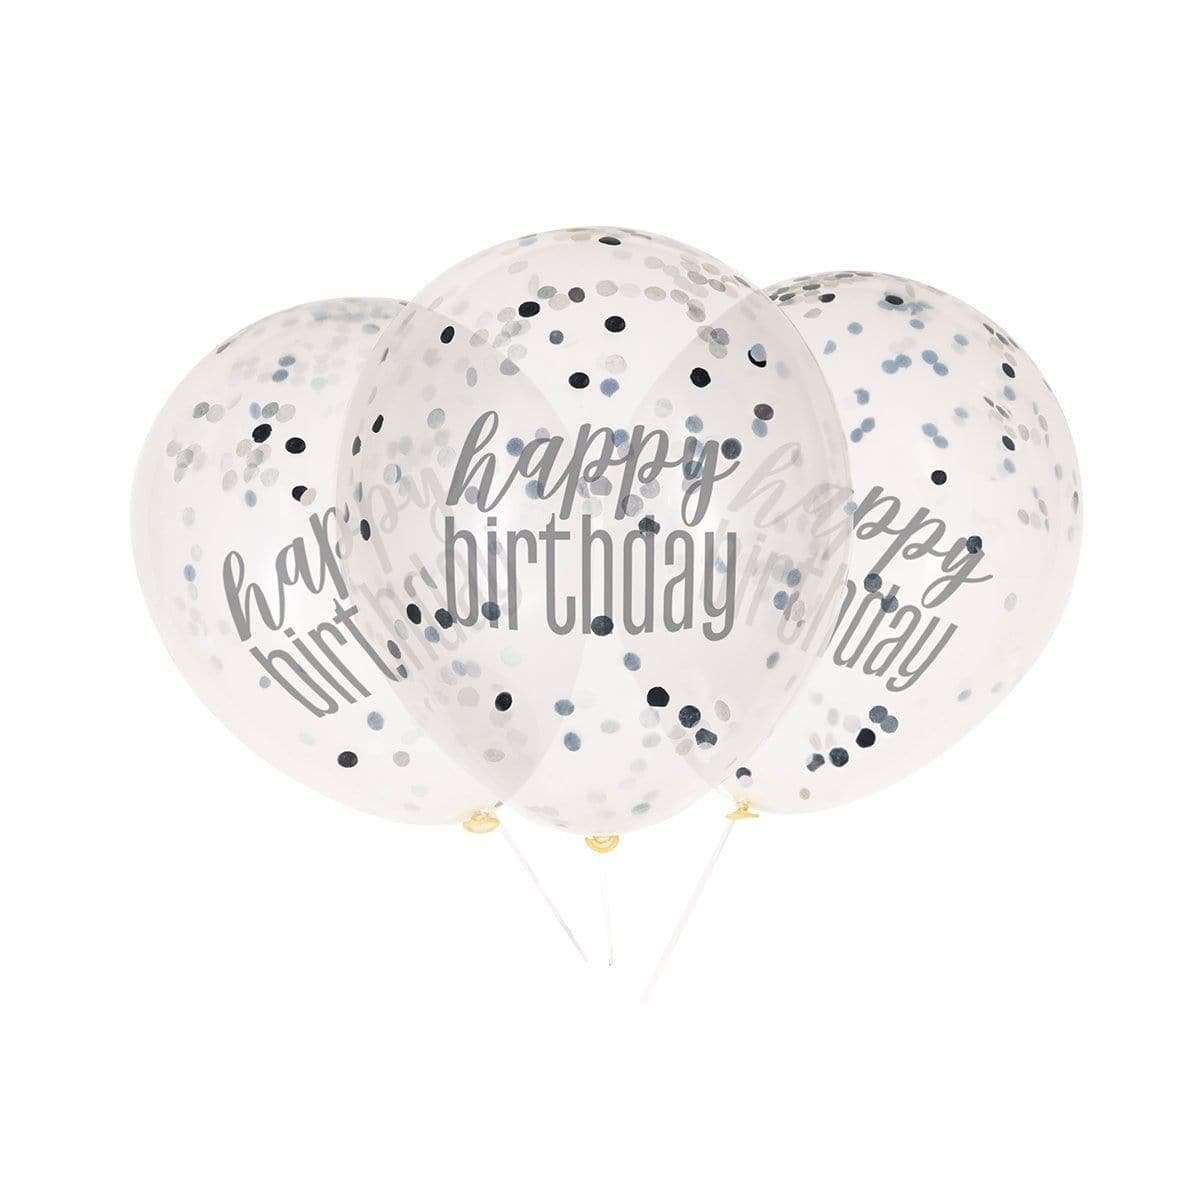 Buy Age Specific Birthday Happy Birthday Black/Silver - Latex Balloon W/Confetti 6/pkg sold at Party Expert